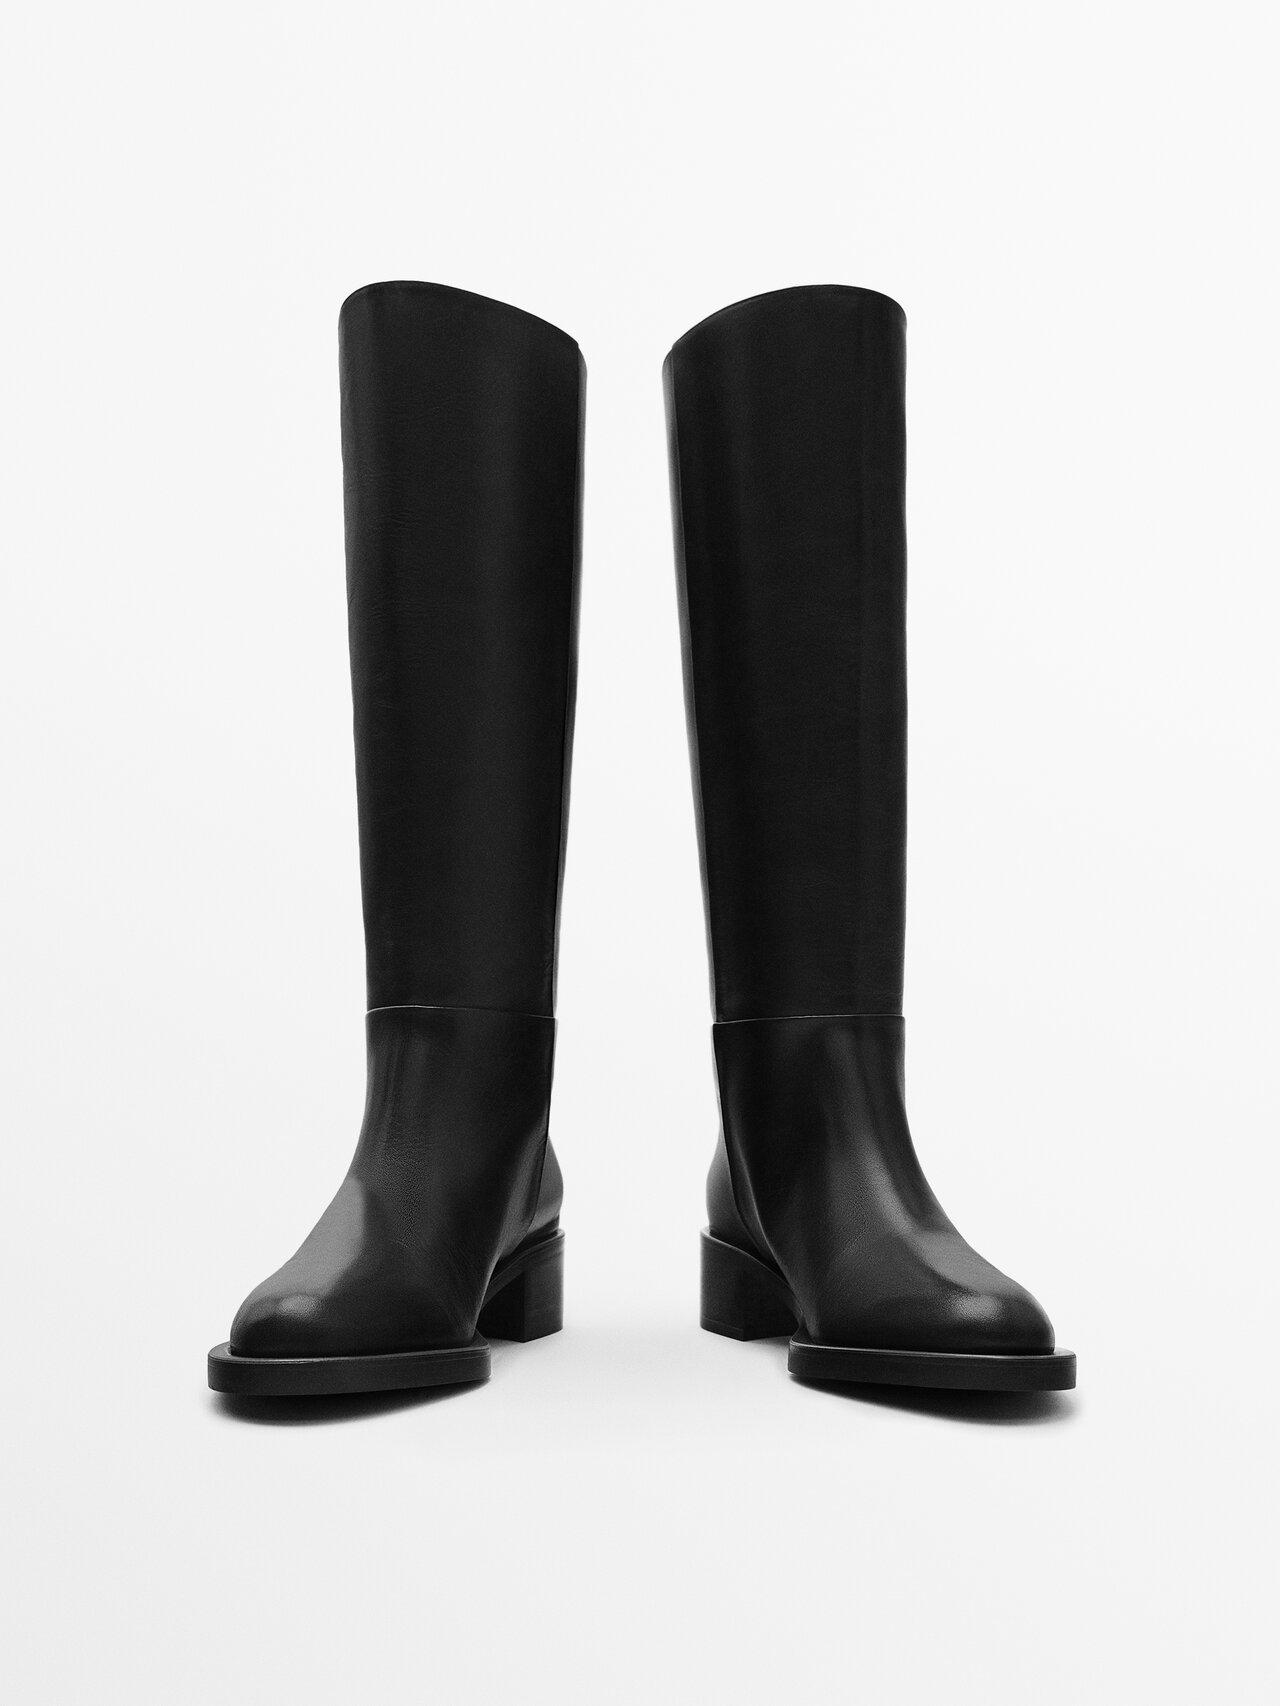 MASSIMO DUTTI Flat Leather Boots in Black | Lyst